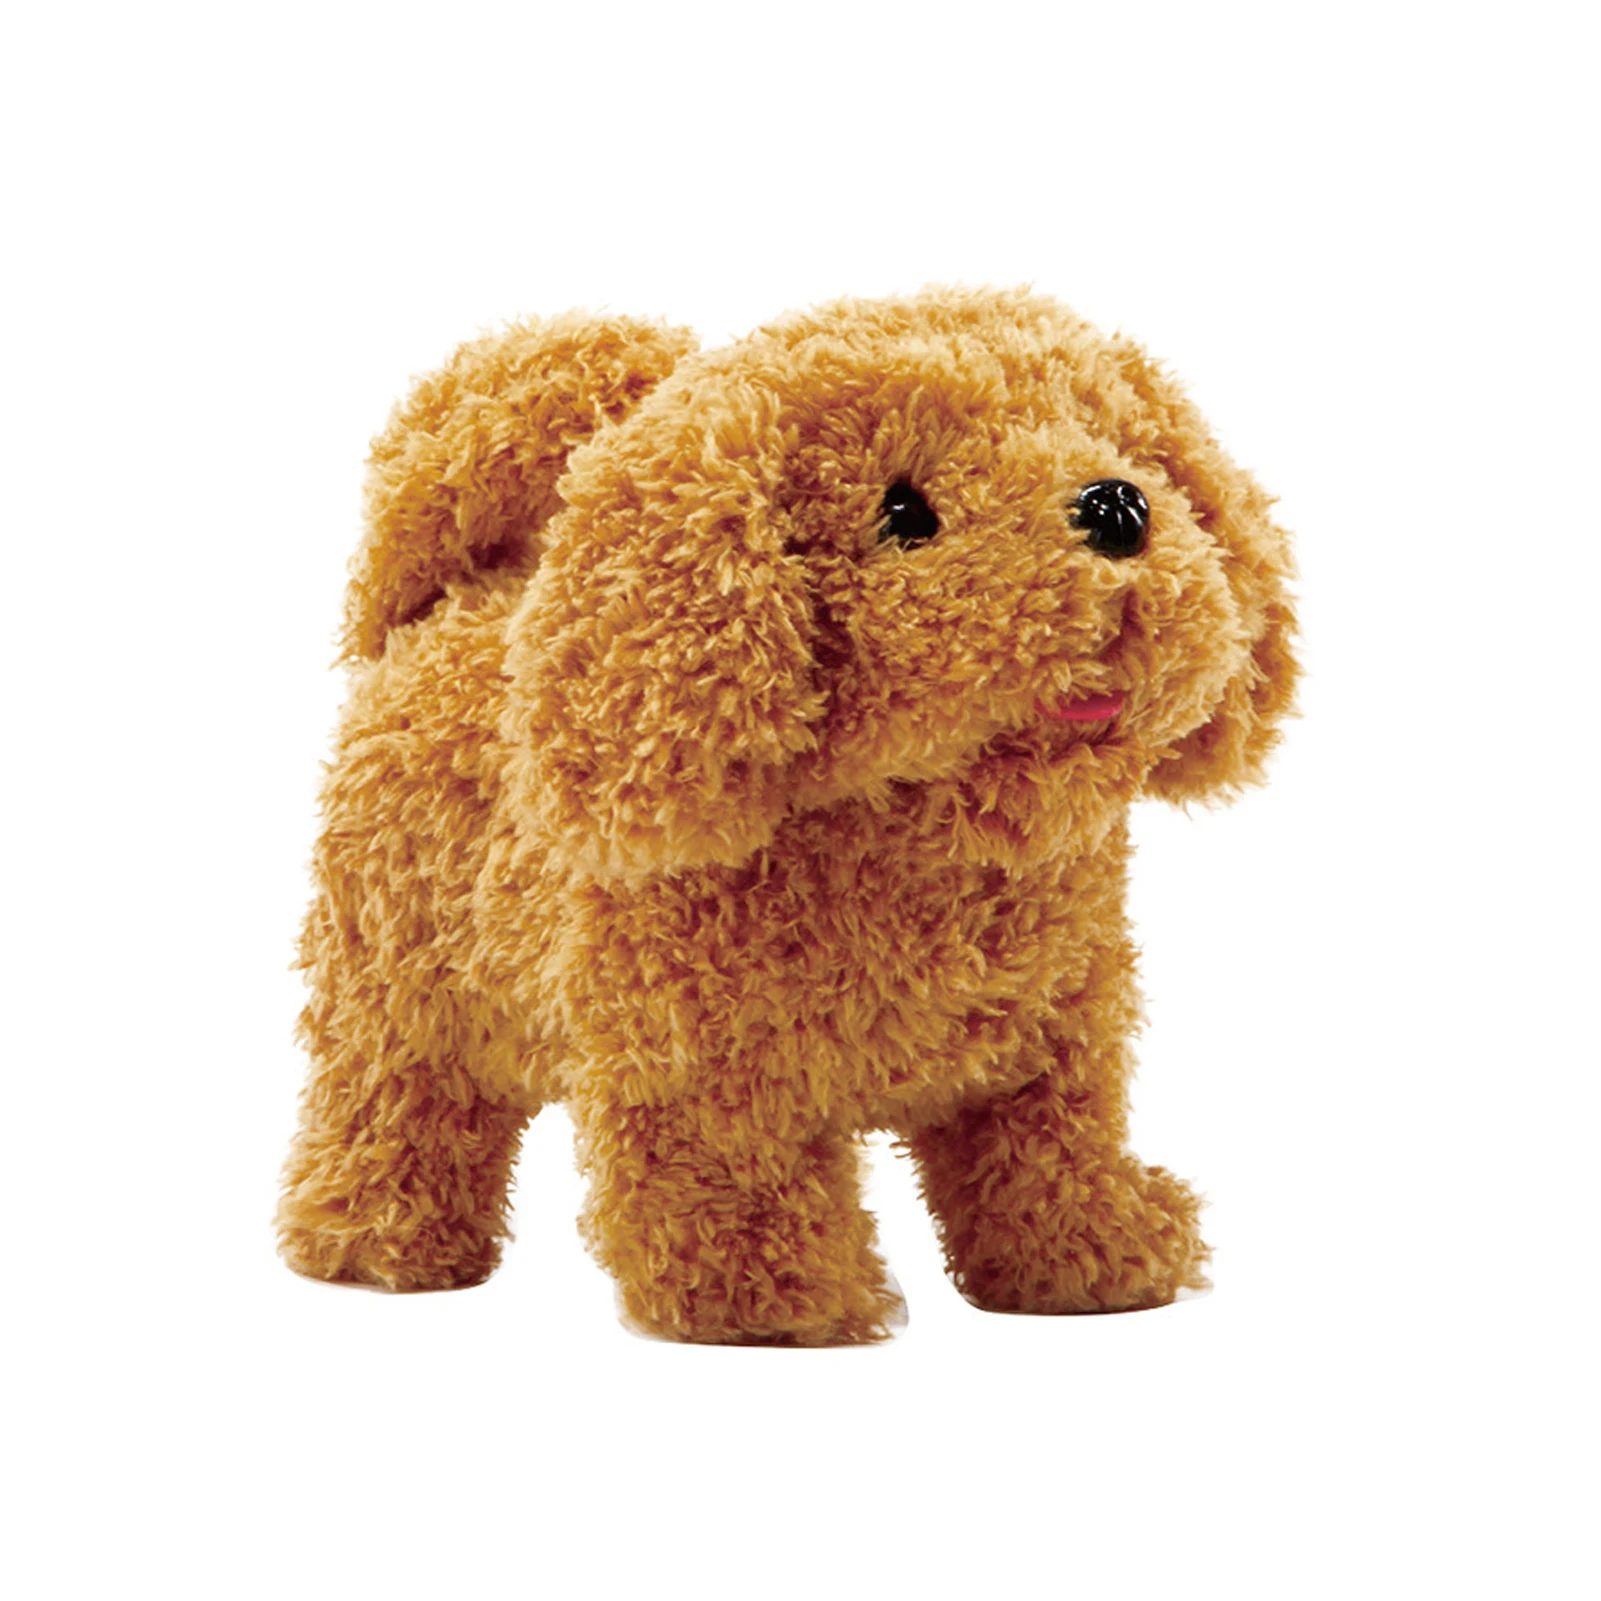 

Talking Golden Retrieve Toy Dogs That Walk And Bark Toy Dogs That Walk And Bark Electronic Interactive Pet Dog Realistic Toy